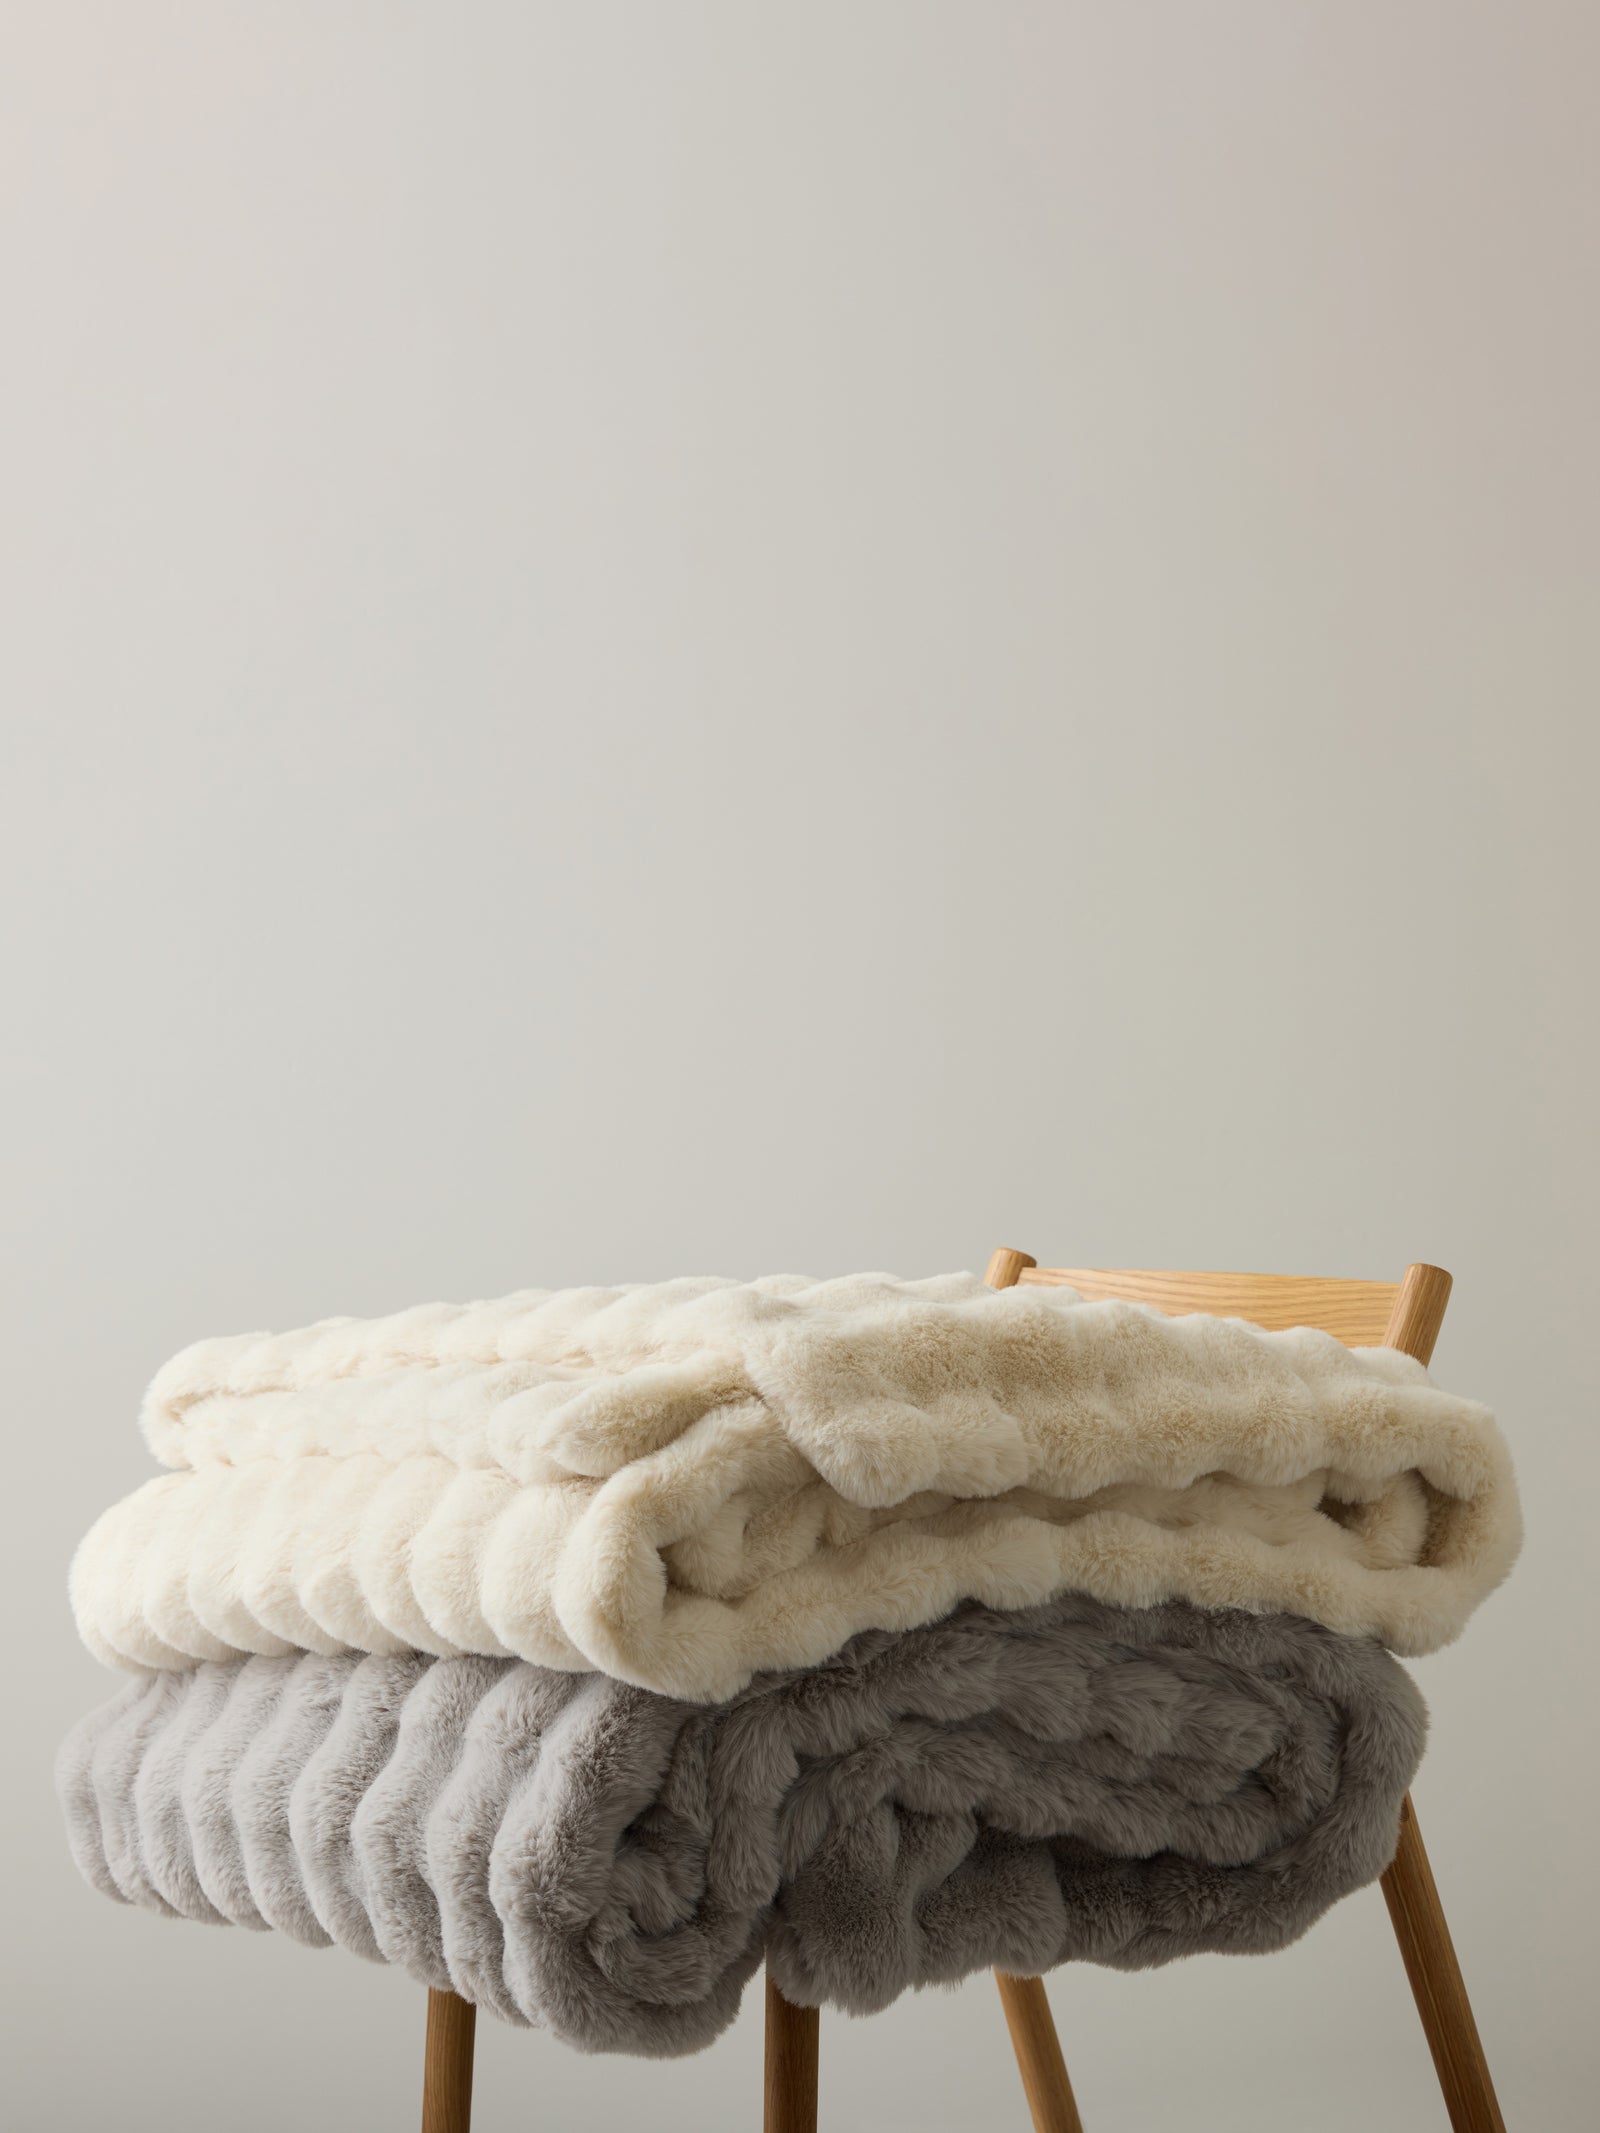 Creme and light grey lush faux fur blankets folded on top of wooden chair